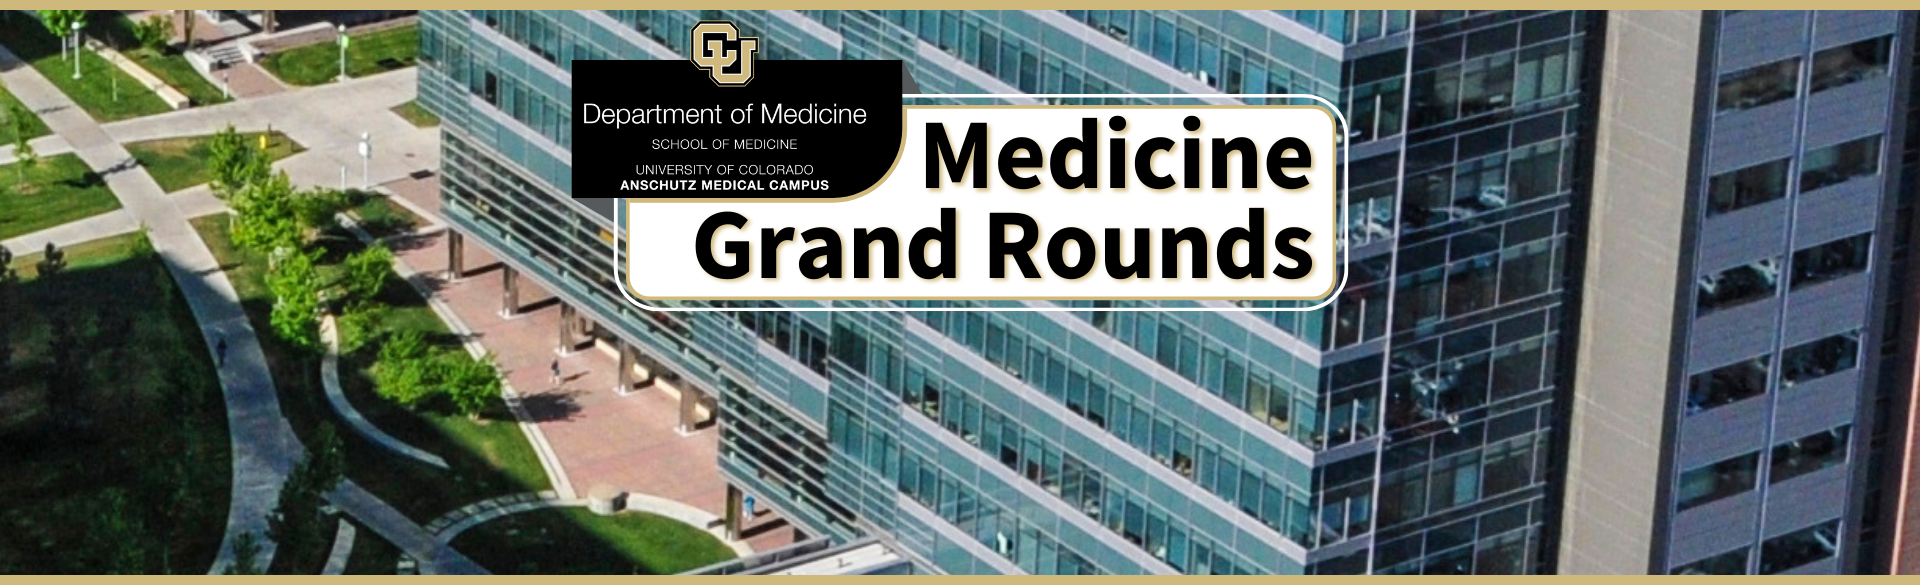 Department of Medicine Grand Rounds